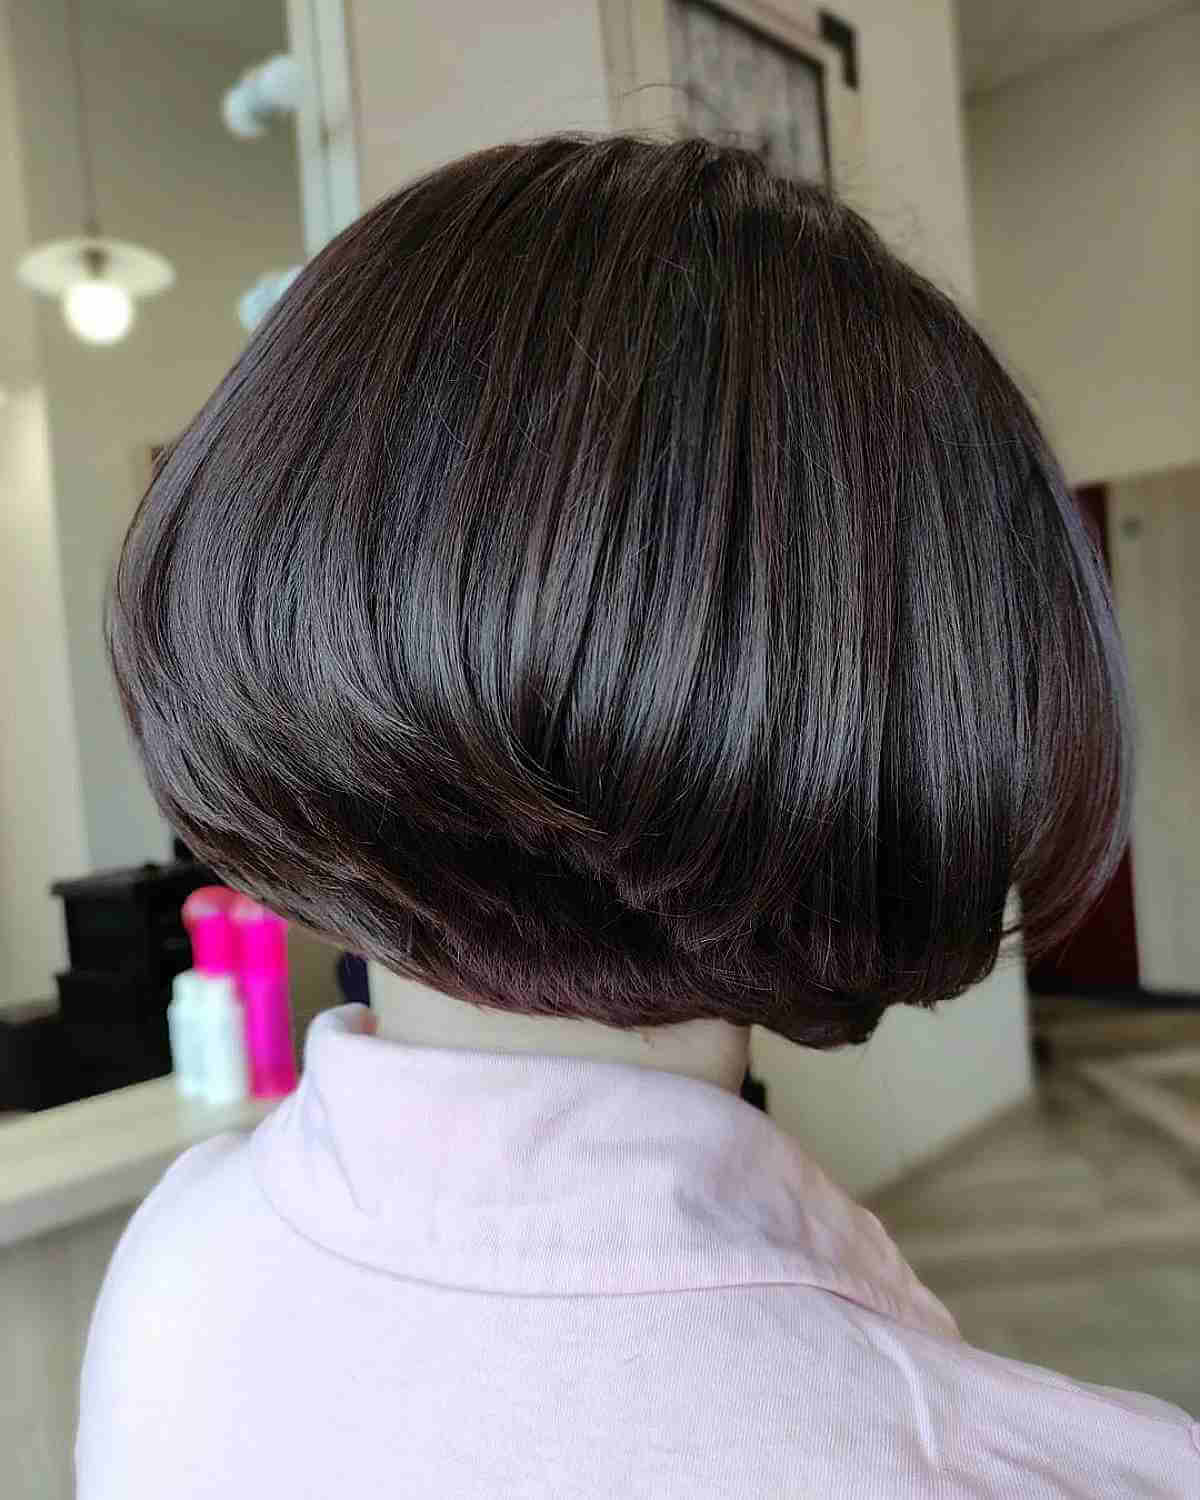 Short Graduated Bob with Feathered Layers